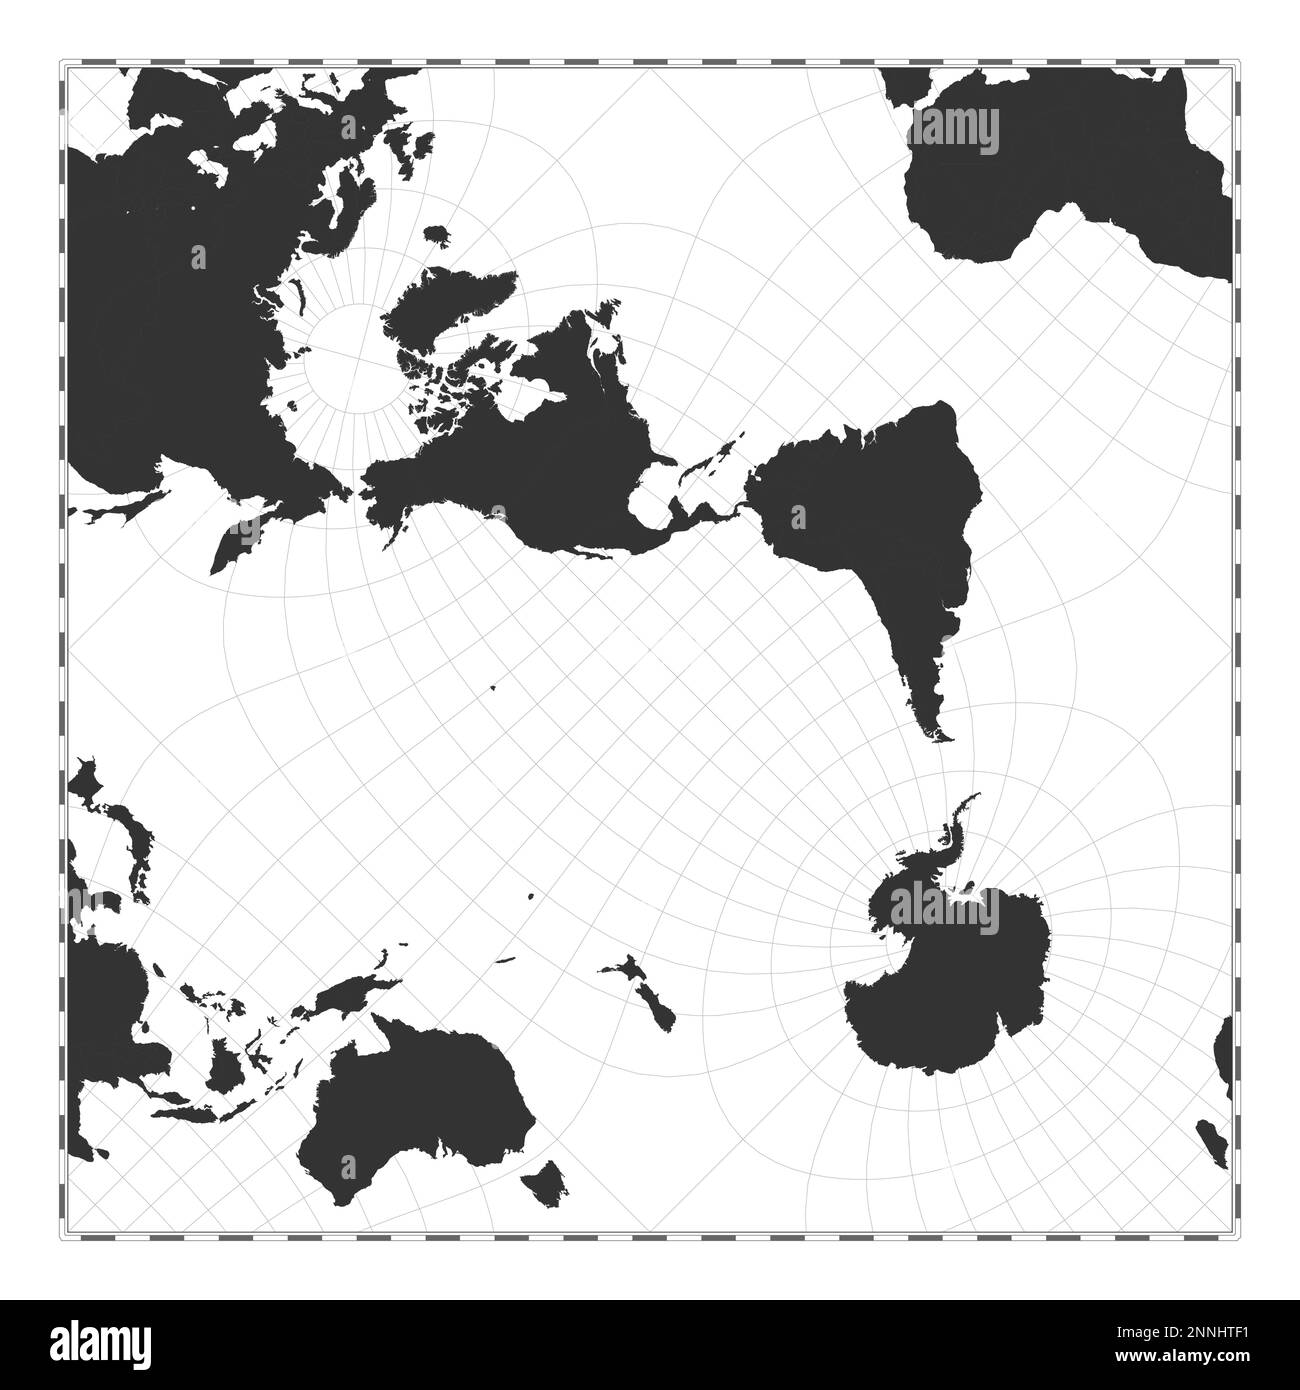 Vector world map. Peirce quincuncial projection. Plain world geographical map with latitude and longitude lines. Centered to 120deg E longitude. Vecto Stock Vector